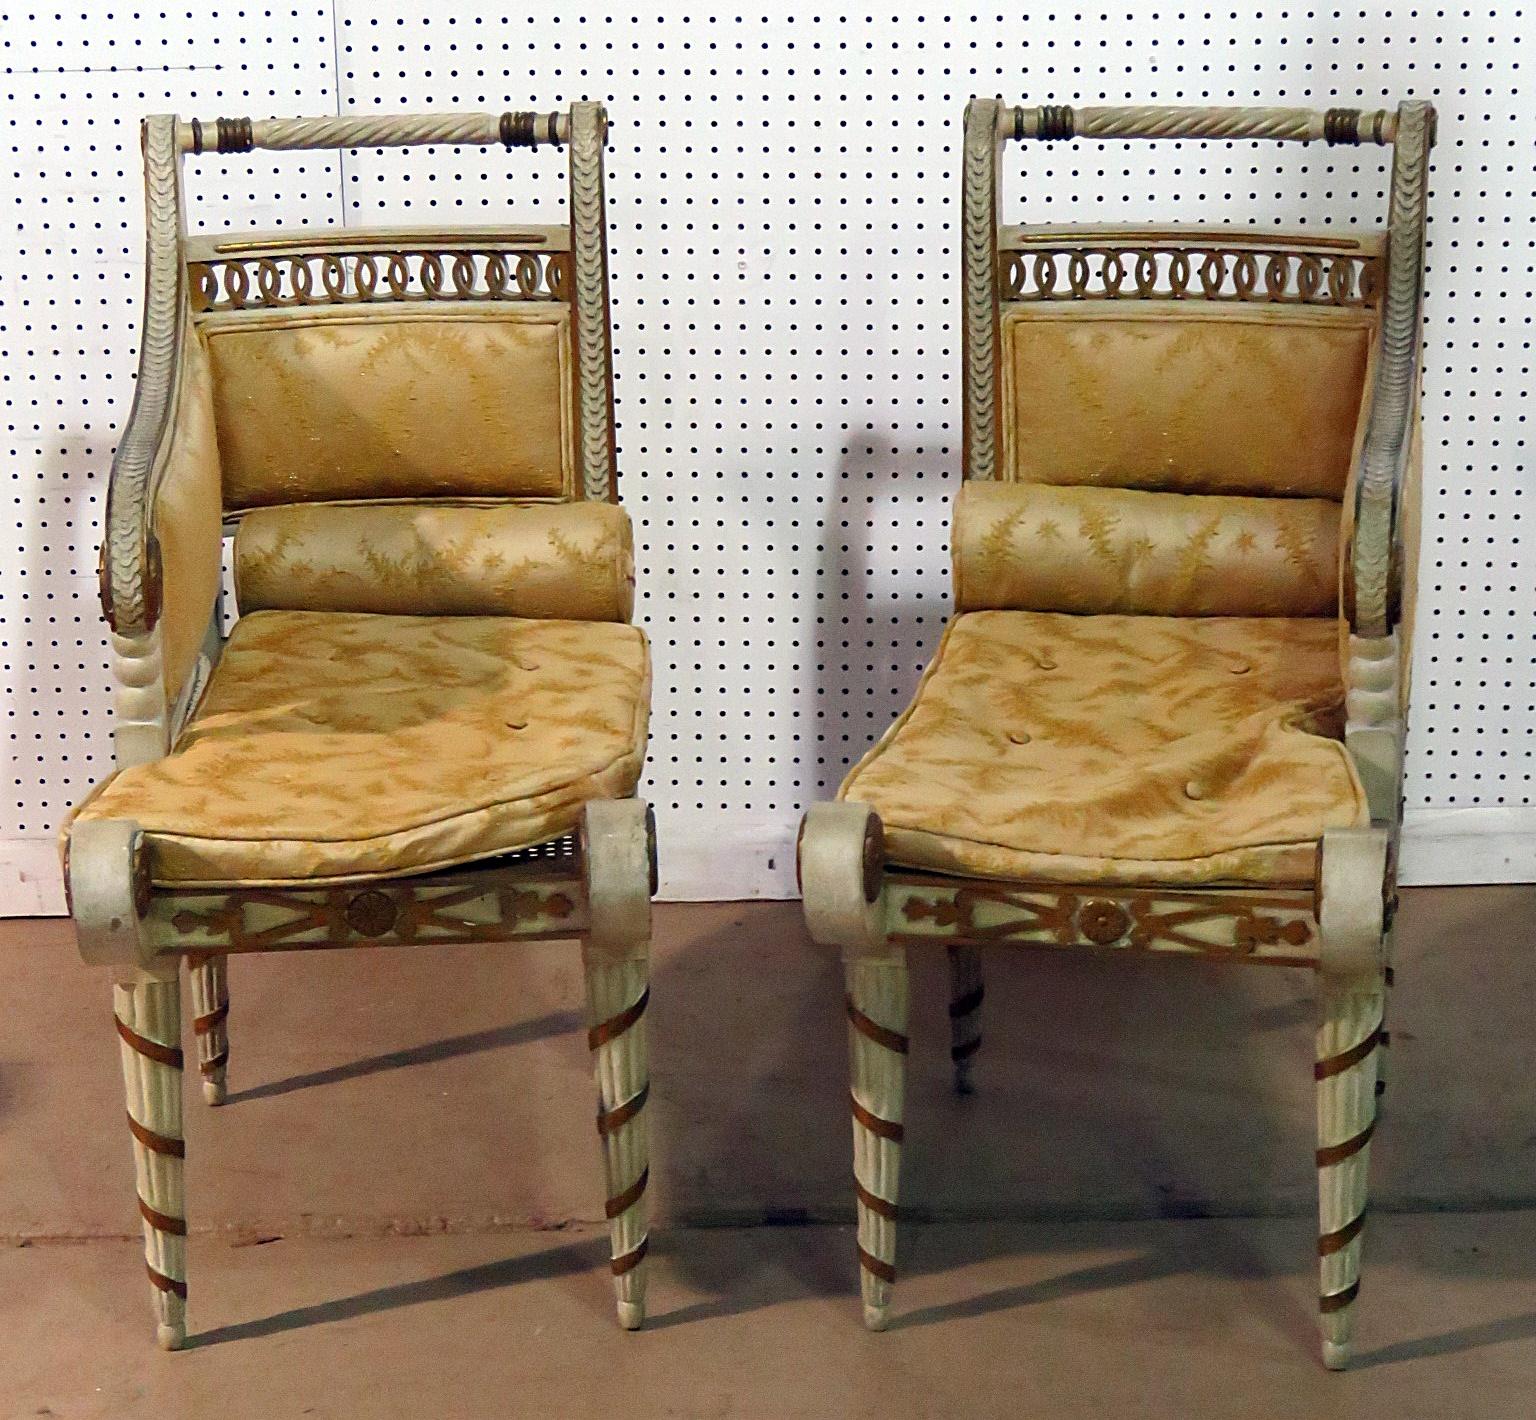 This is a very rare pair of small recamiers but proportioned as if they are larger full size versions. This Pair of petite Regency style distressed painted recamiers has removable cushions, and caned seats. The cane is damaged on one chair but we